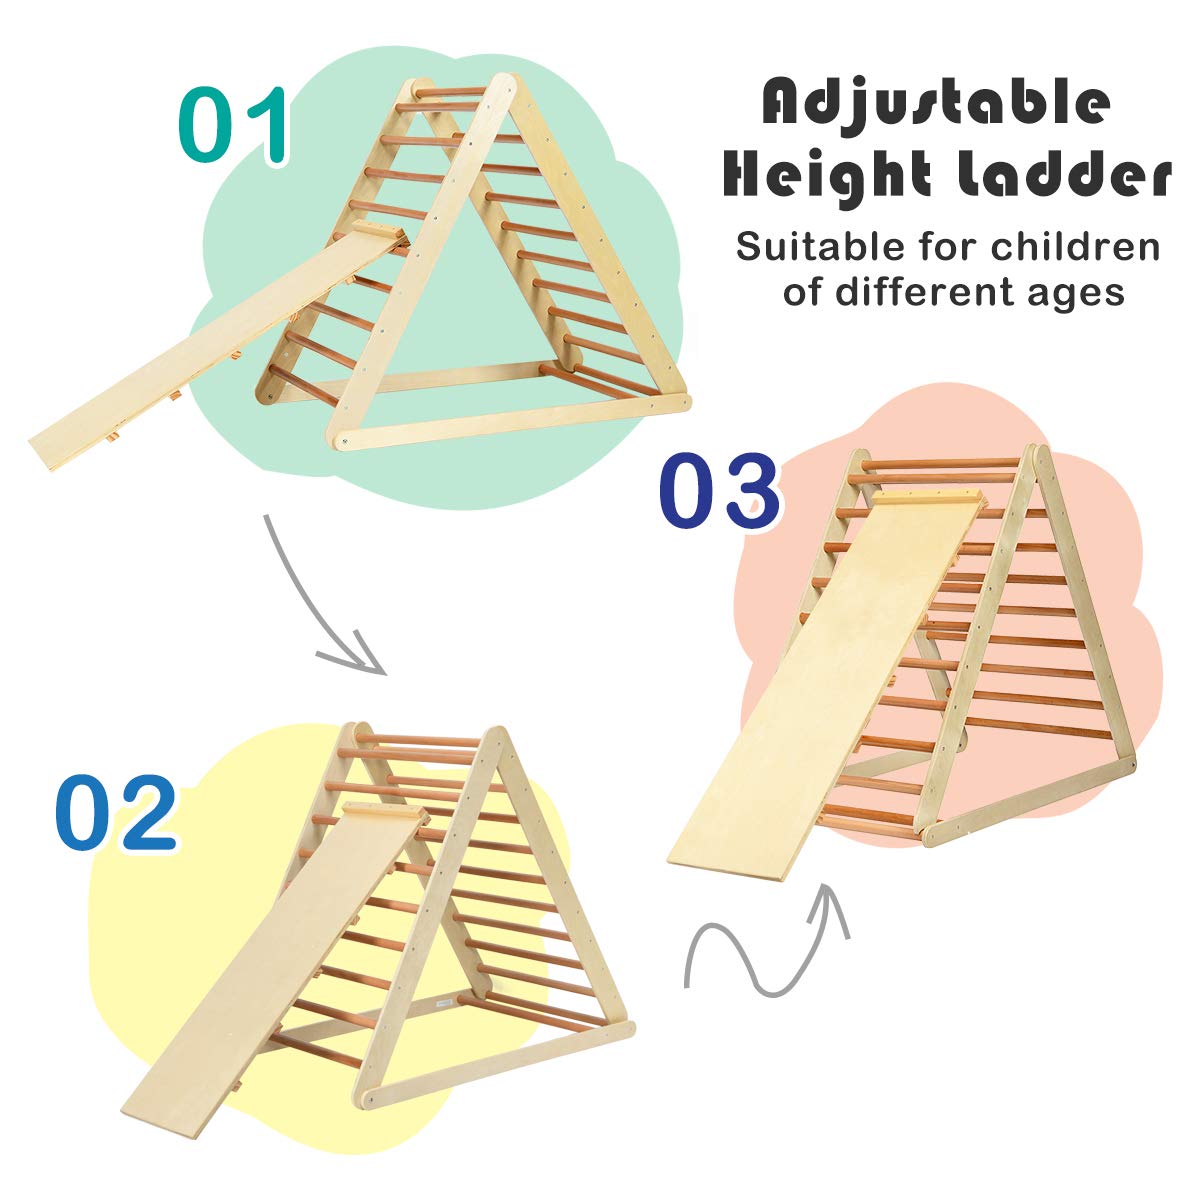 Costzon Foldable Triangle Climber with Reversible Ramp, 3 in 1 Climbing Toys for Toddlers Wooden Montessori Play Gym for Sliding & Climbing, Indoor Playground Ladder for Boys Girls Gift Present